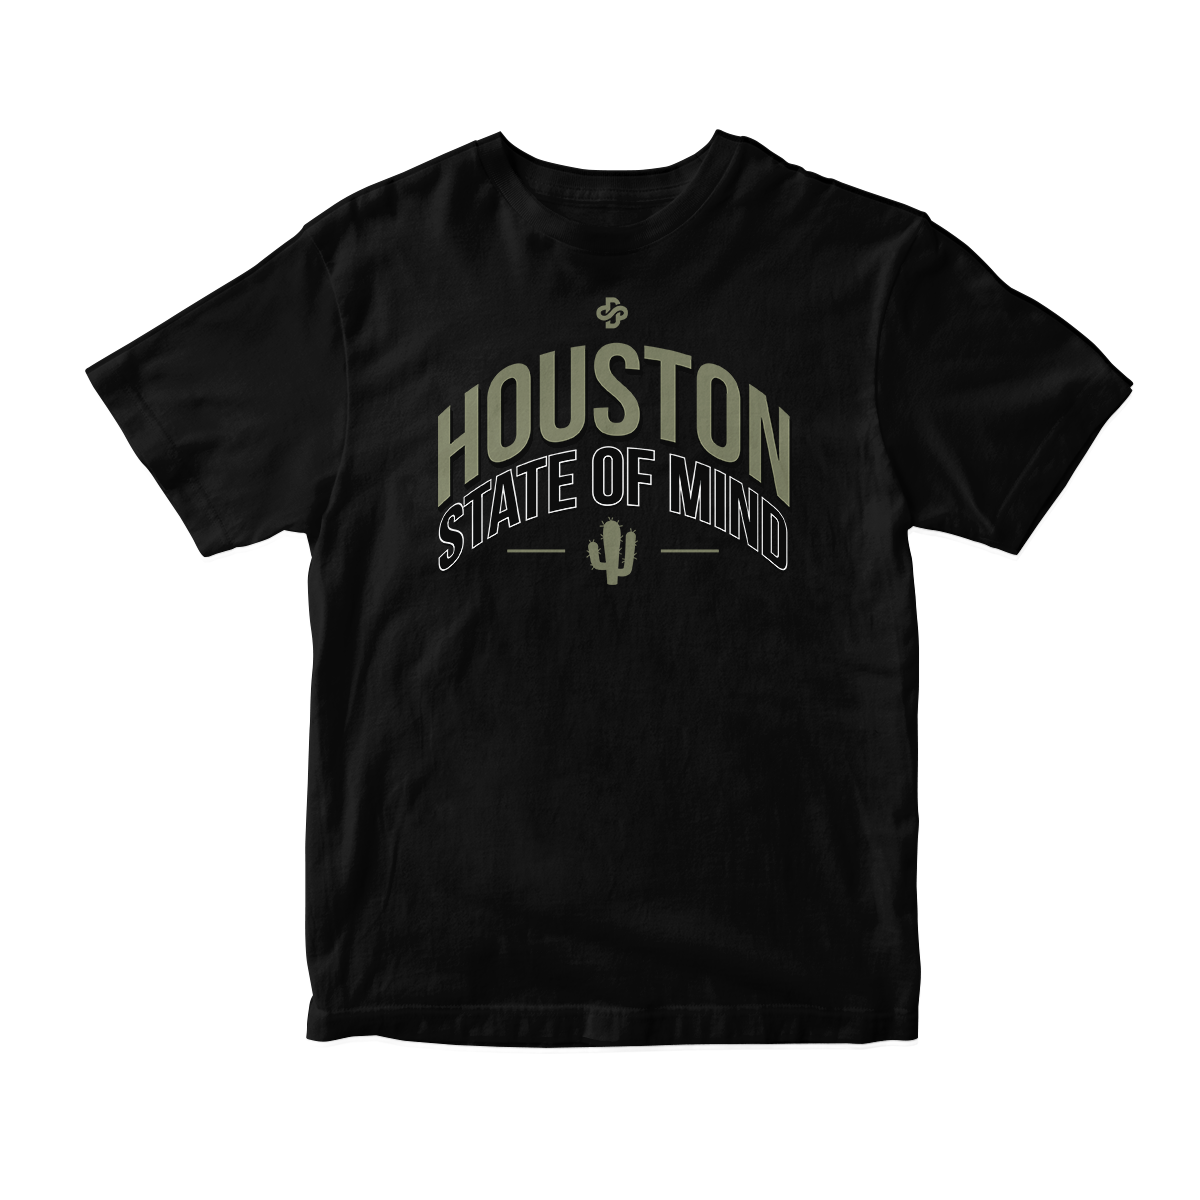 'Houston State of Mind' in Medium Olive CW Short Sleeve Tee